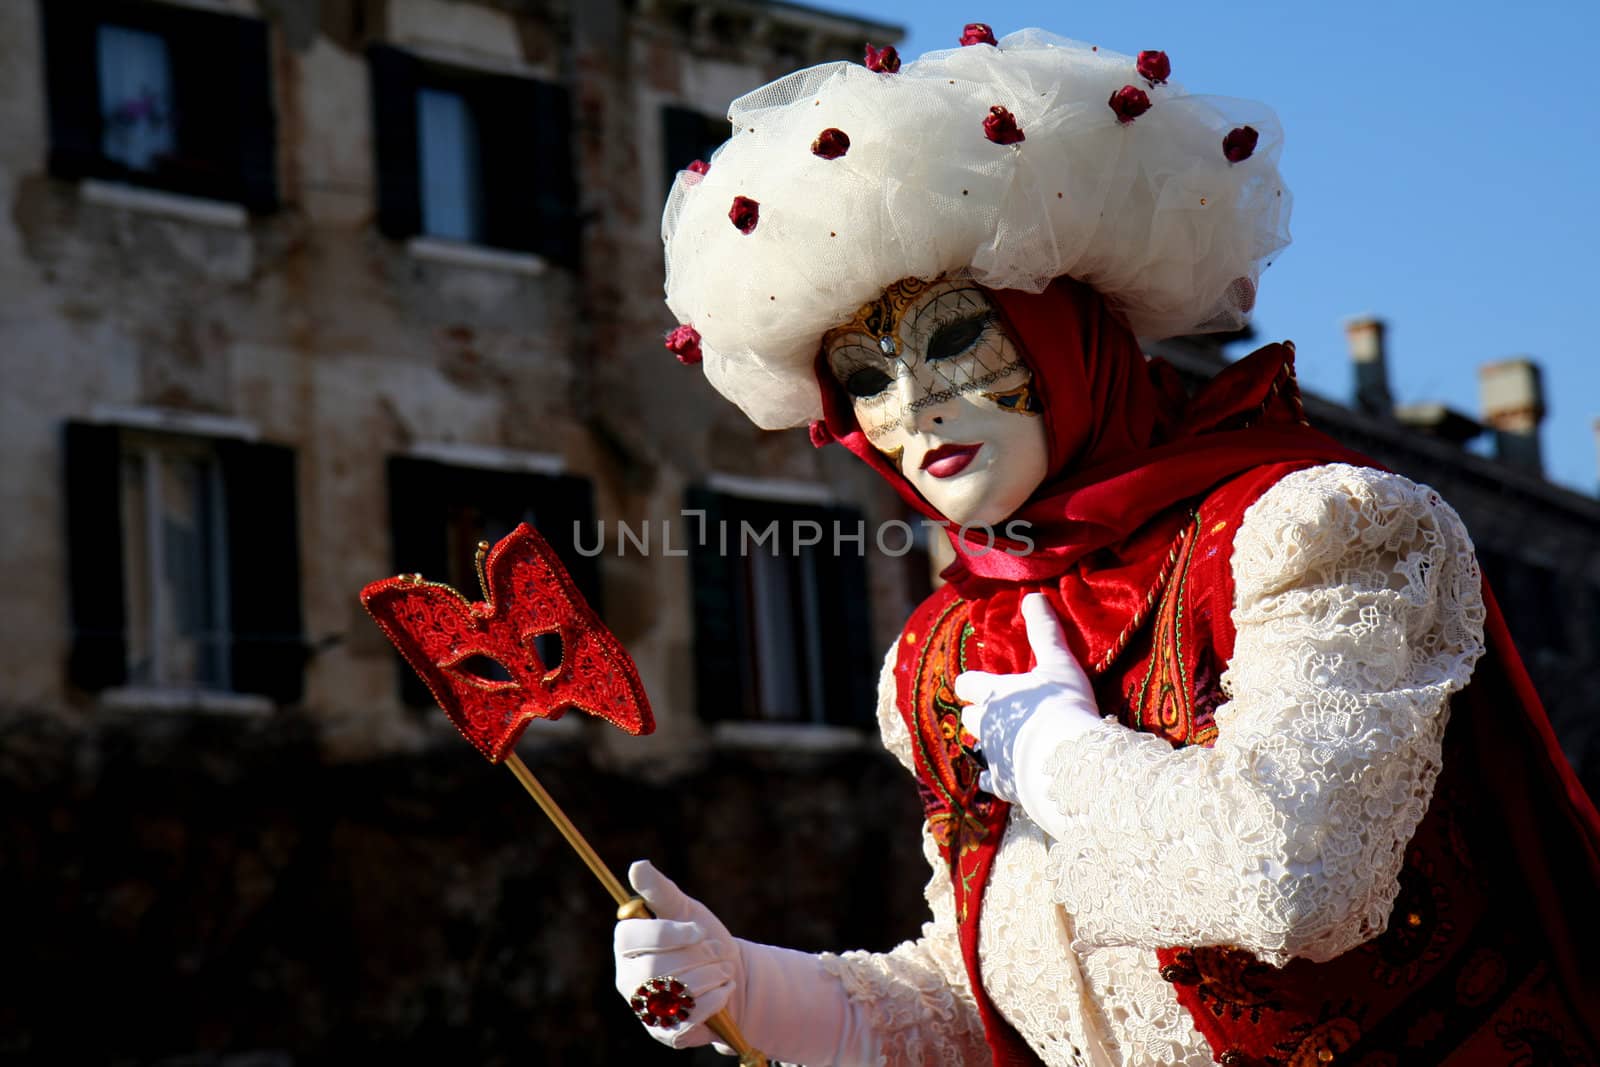 A masked woman with a red eye mask, dressed in white and red, at the Venice Carnival